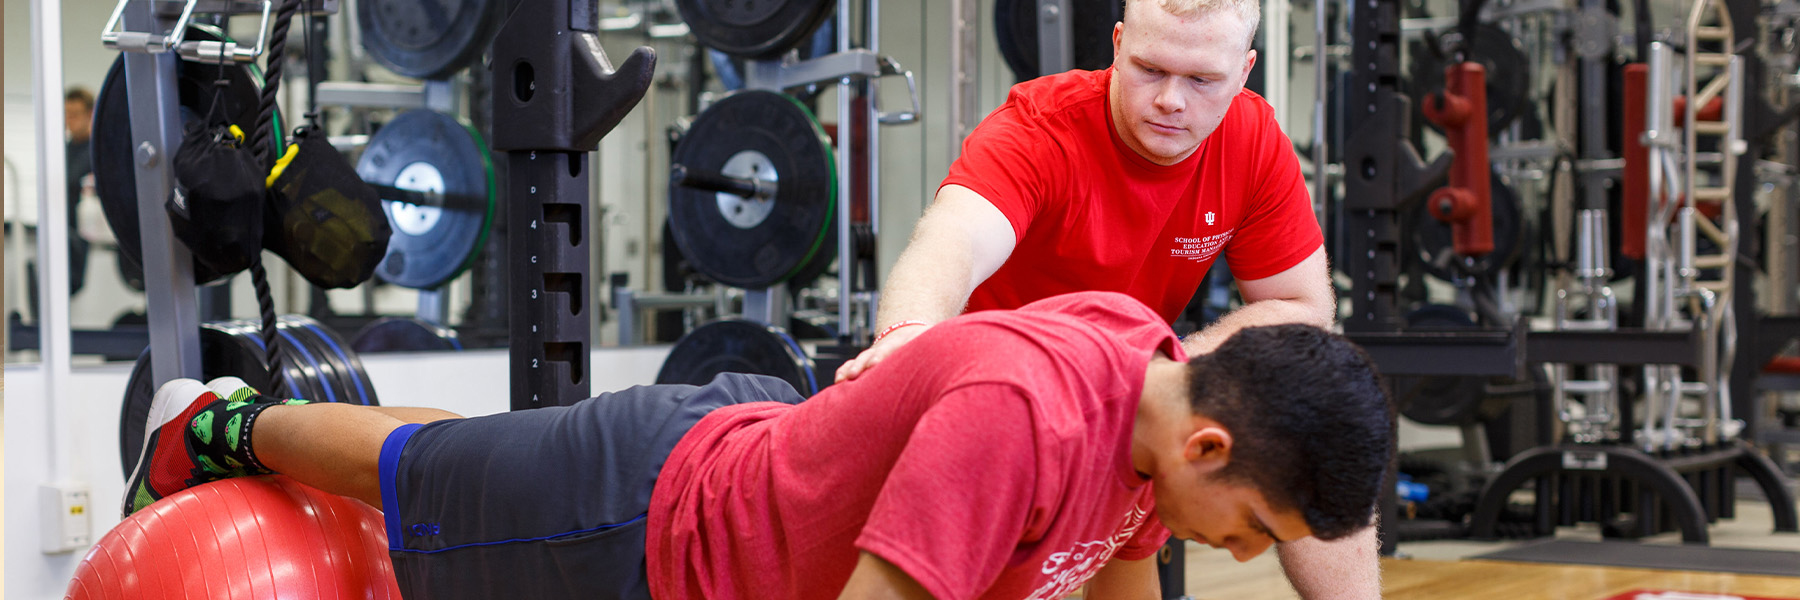 A male student working with another male student personal trainer